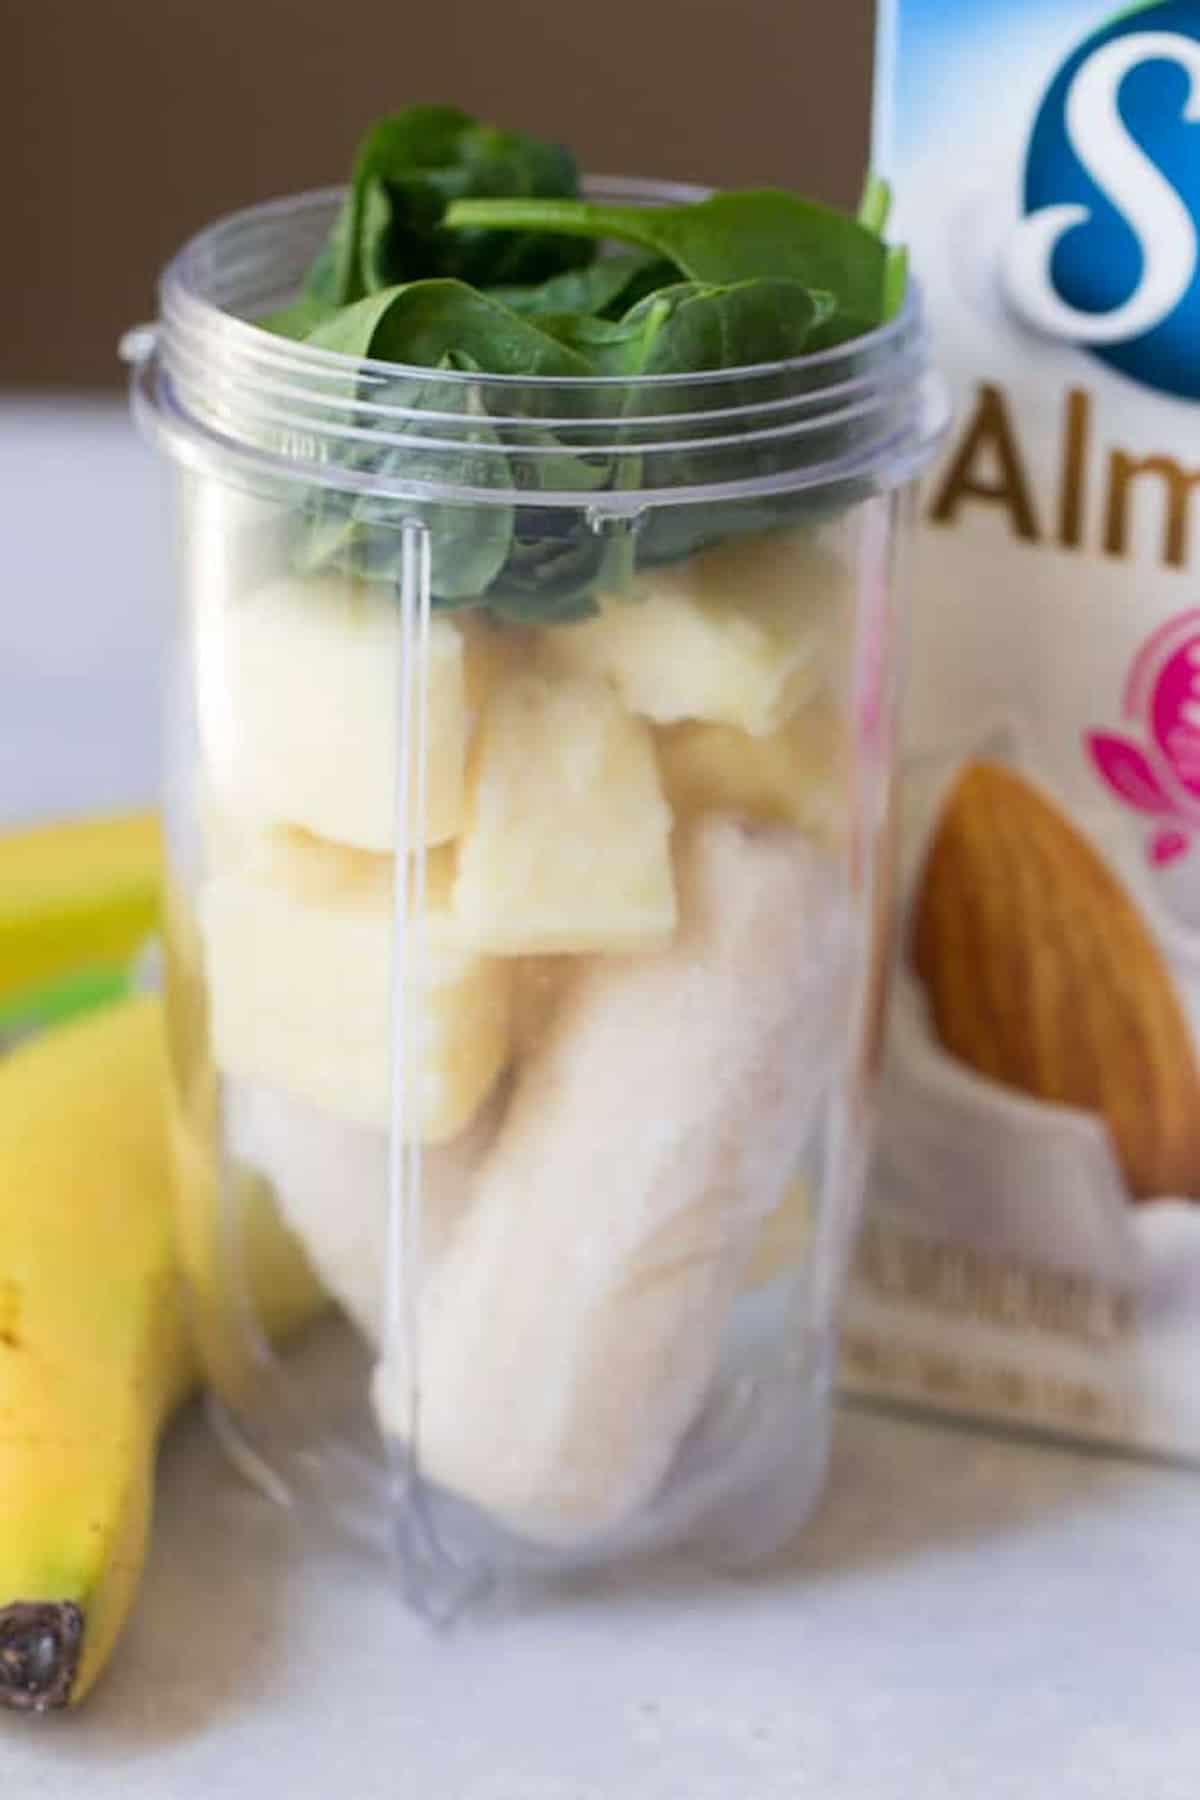 A blender cup filled with spinach, pineapple, and banana is placed next to a banana and a carton of almond milk.